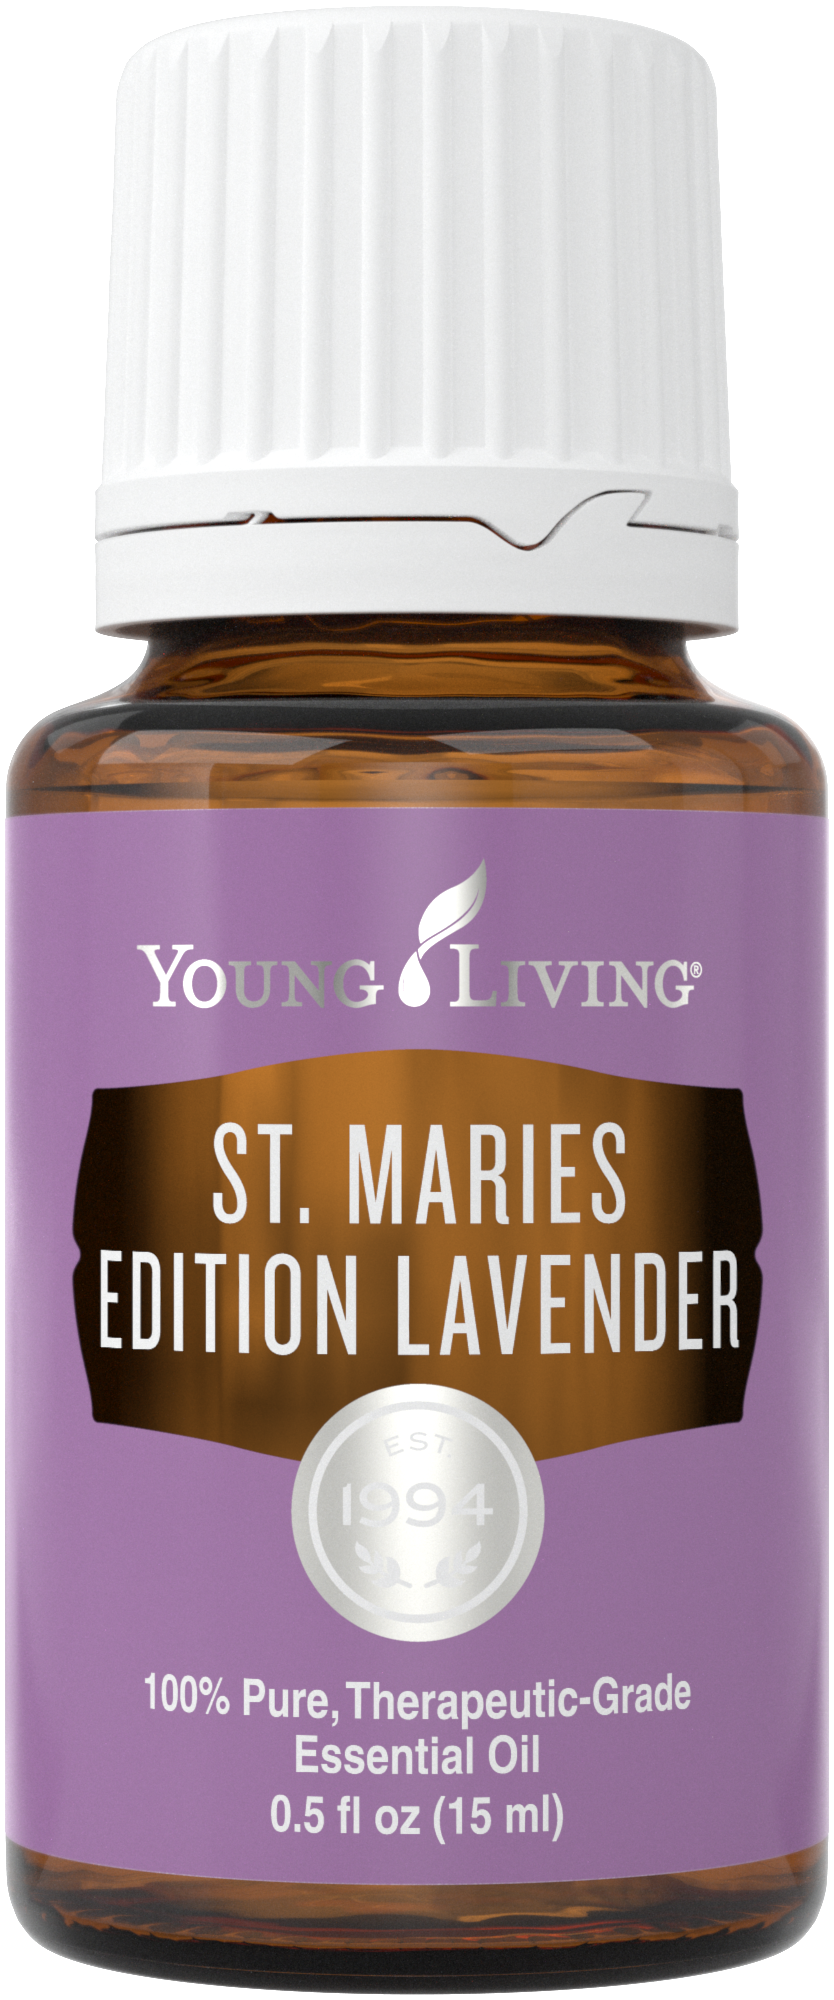 St Maries Lavender 15ml Silo.png